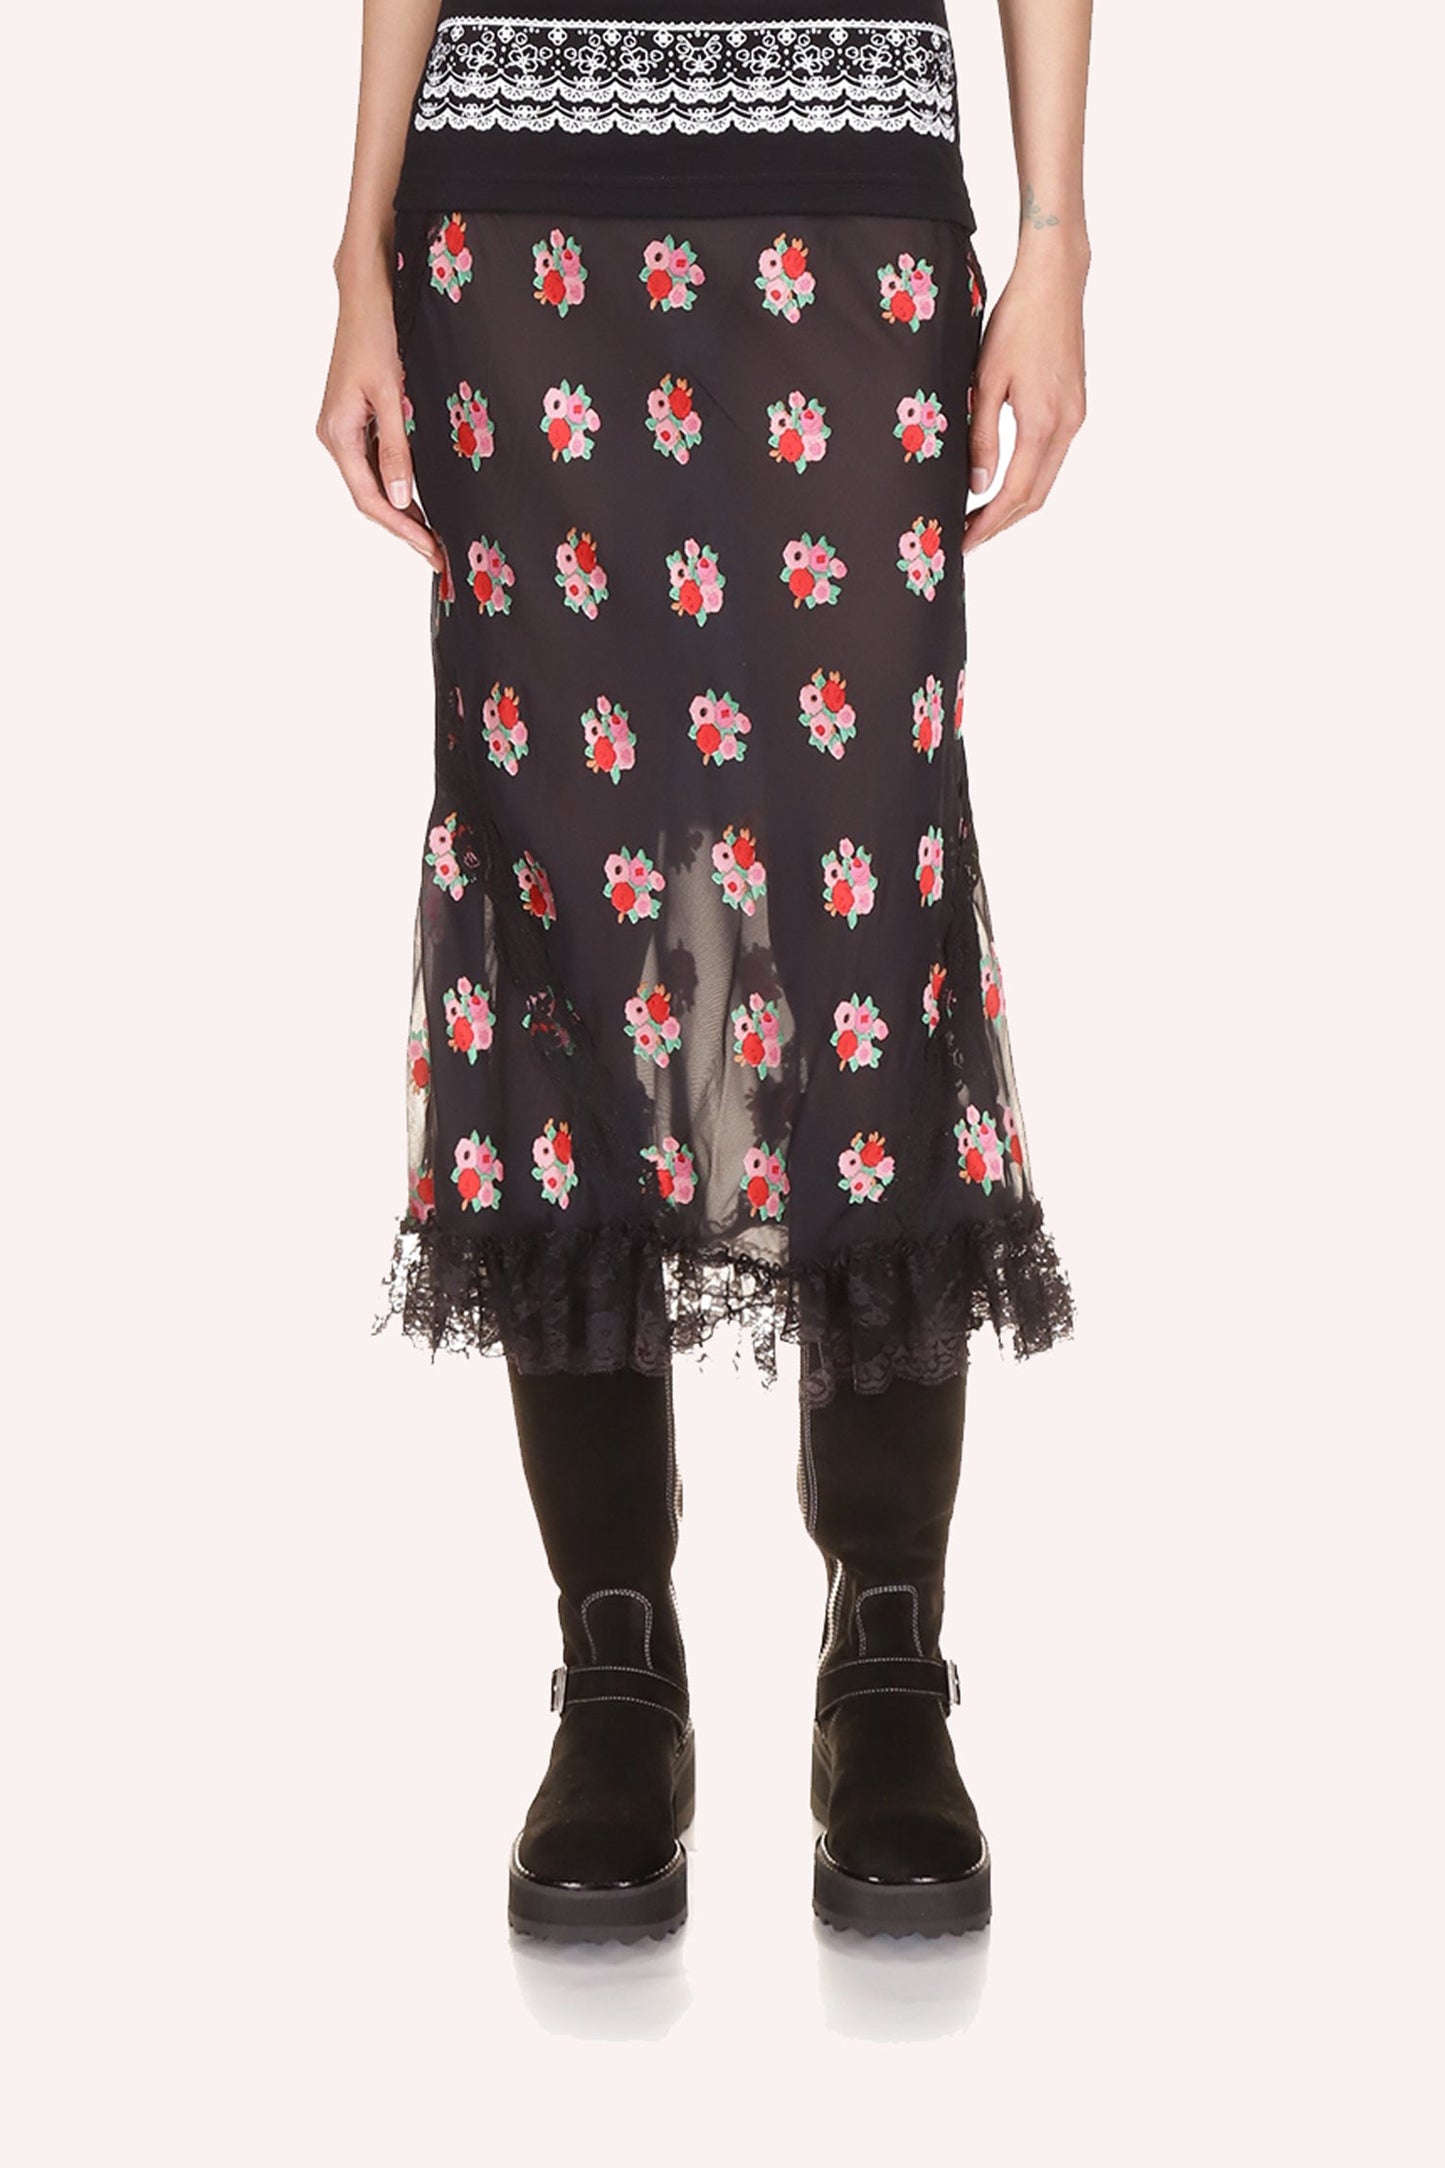 Rosie posies Skirt Black, under knee long, see-through from hips down, black lace at bottom